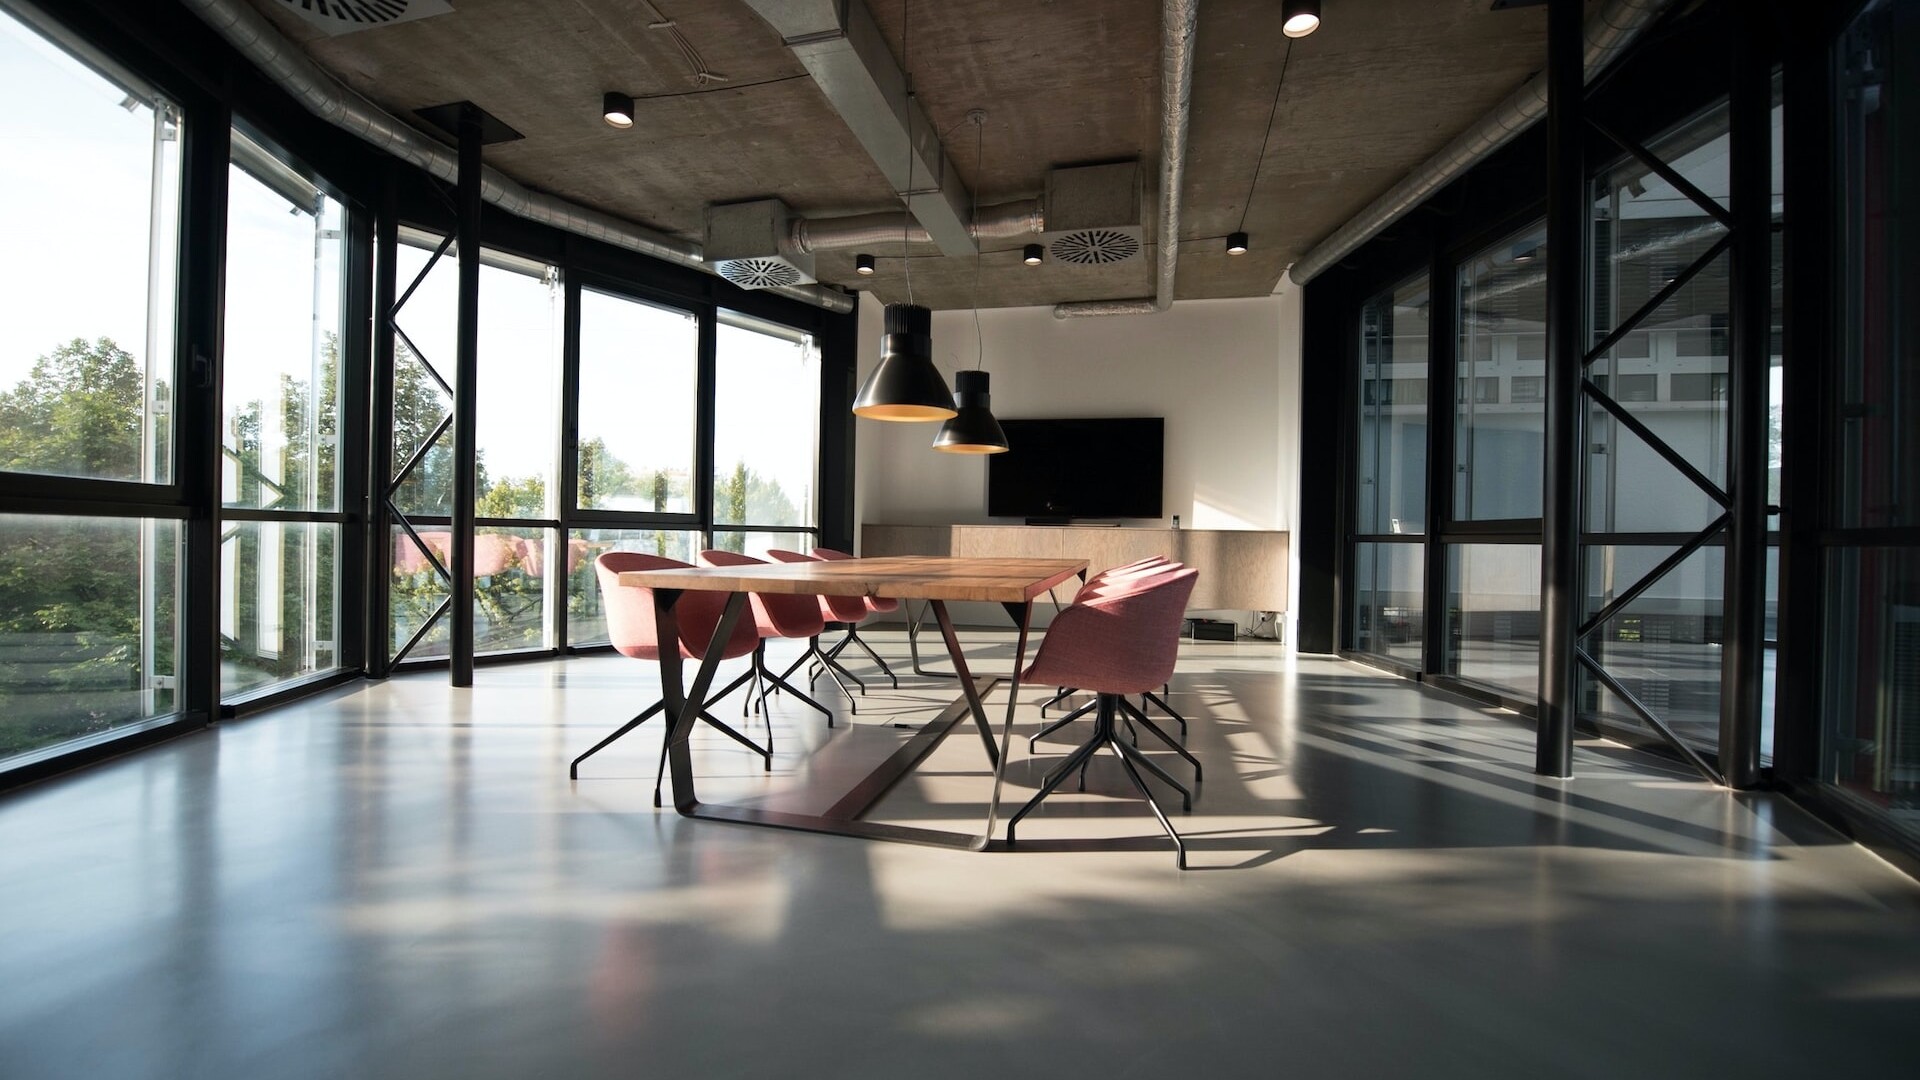 Design Agency Office Space with one large conference table and chairs in an empty room.